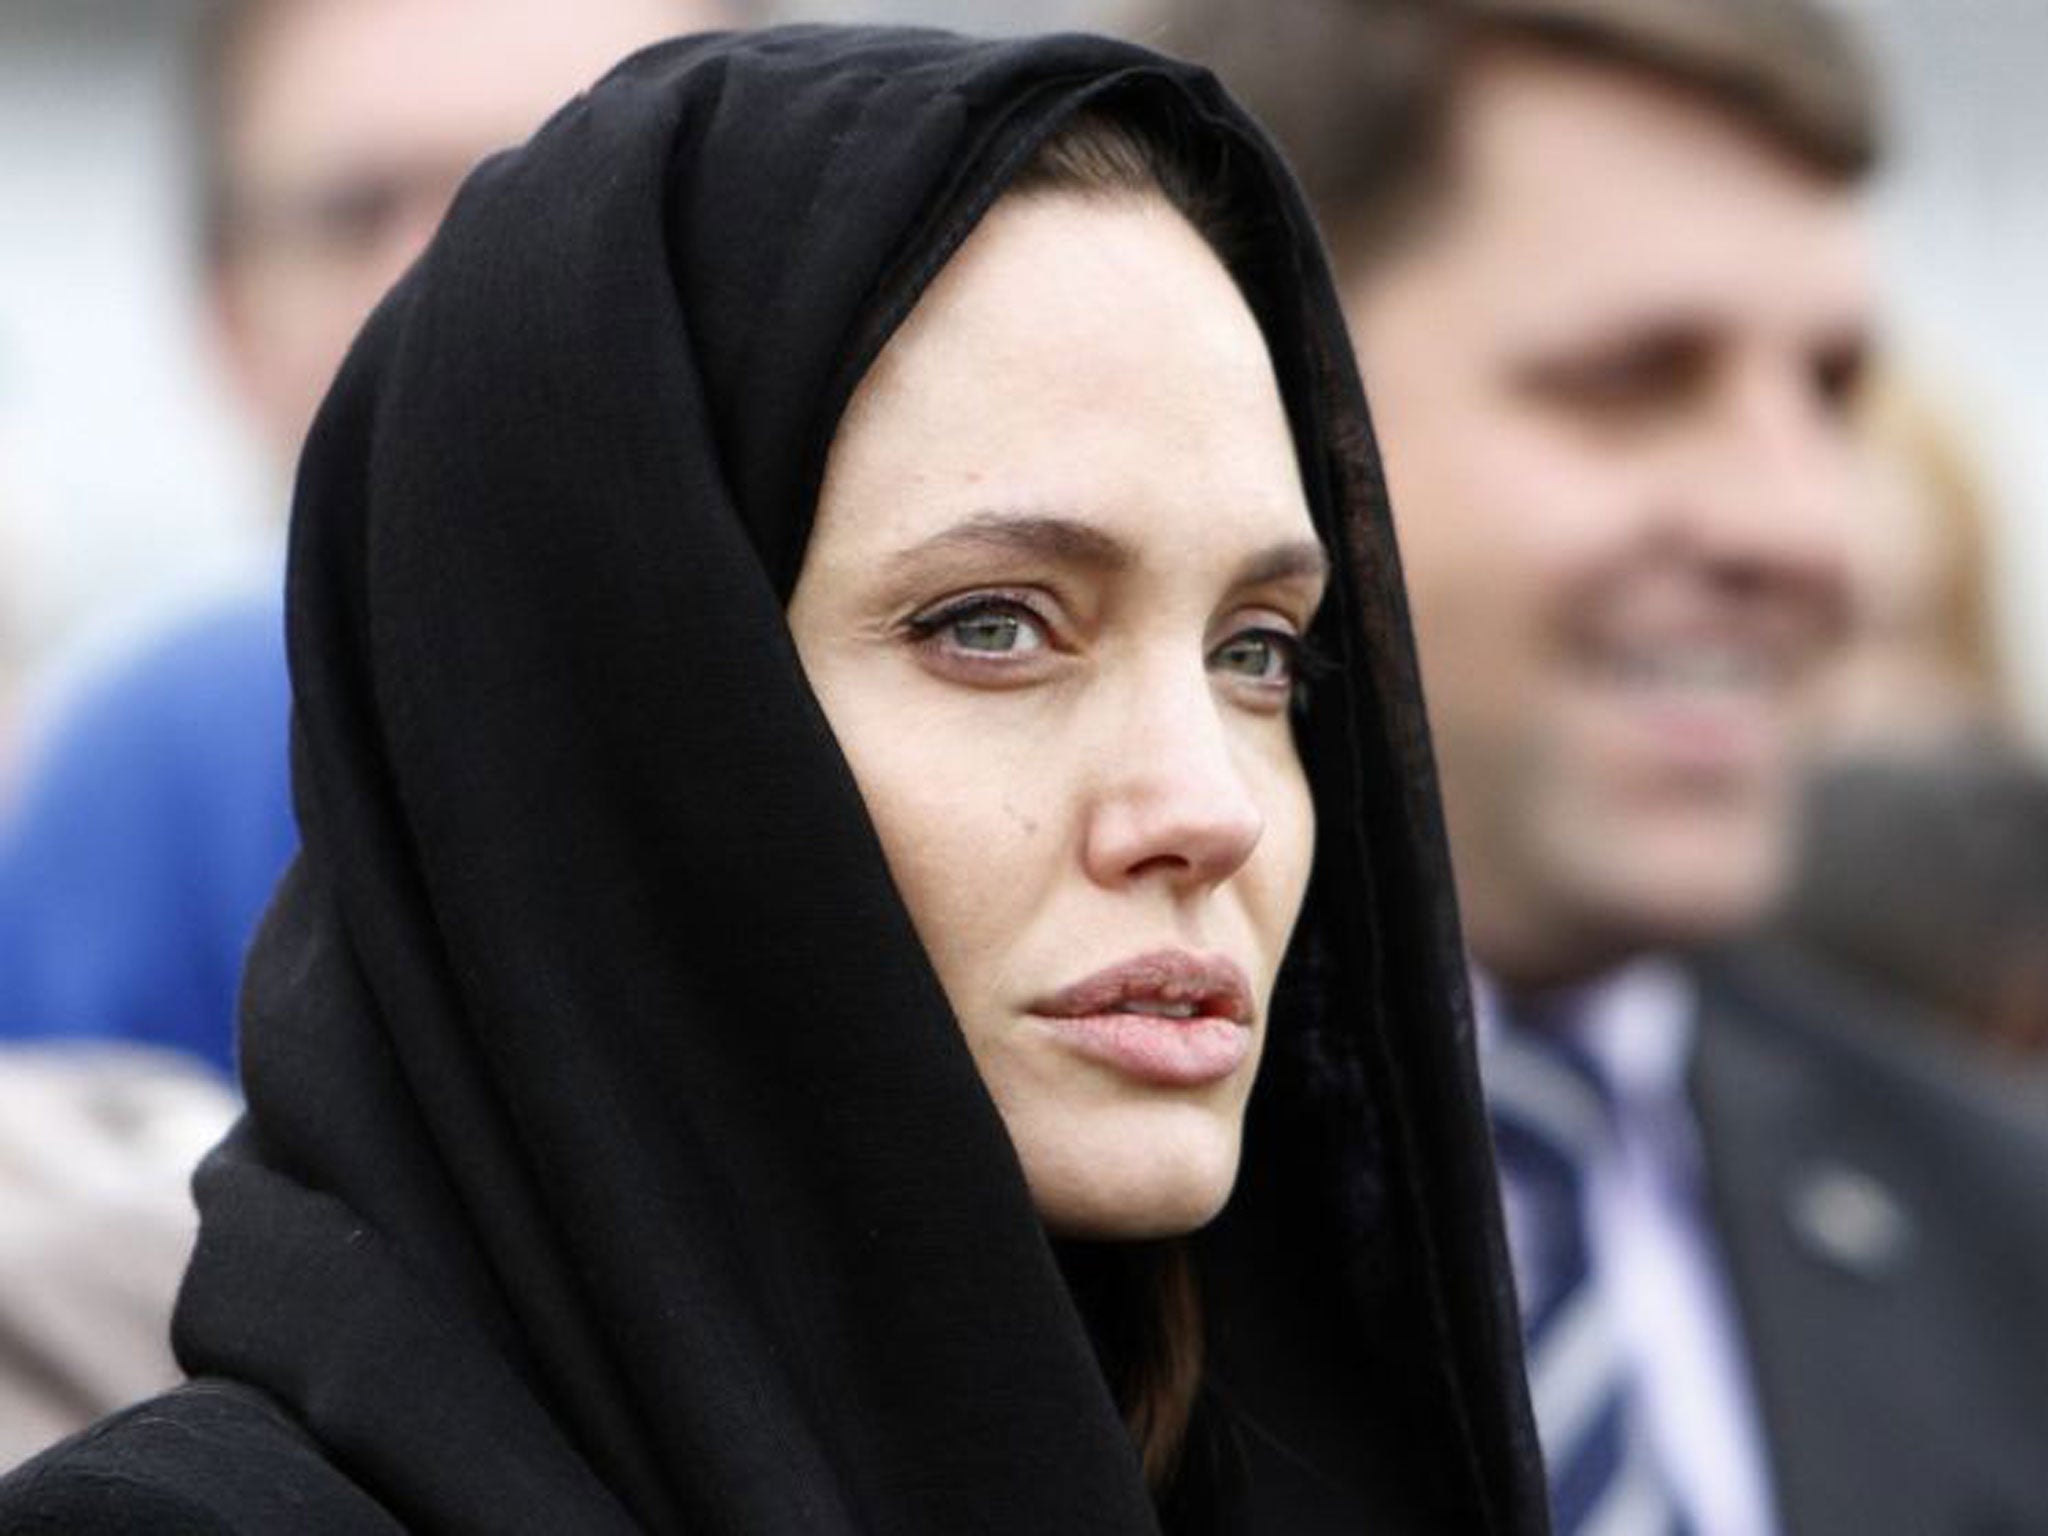 Angelina Jolie appeared sombre as she listened to victims in the town of Srebrenica